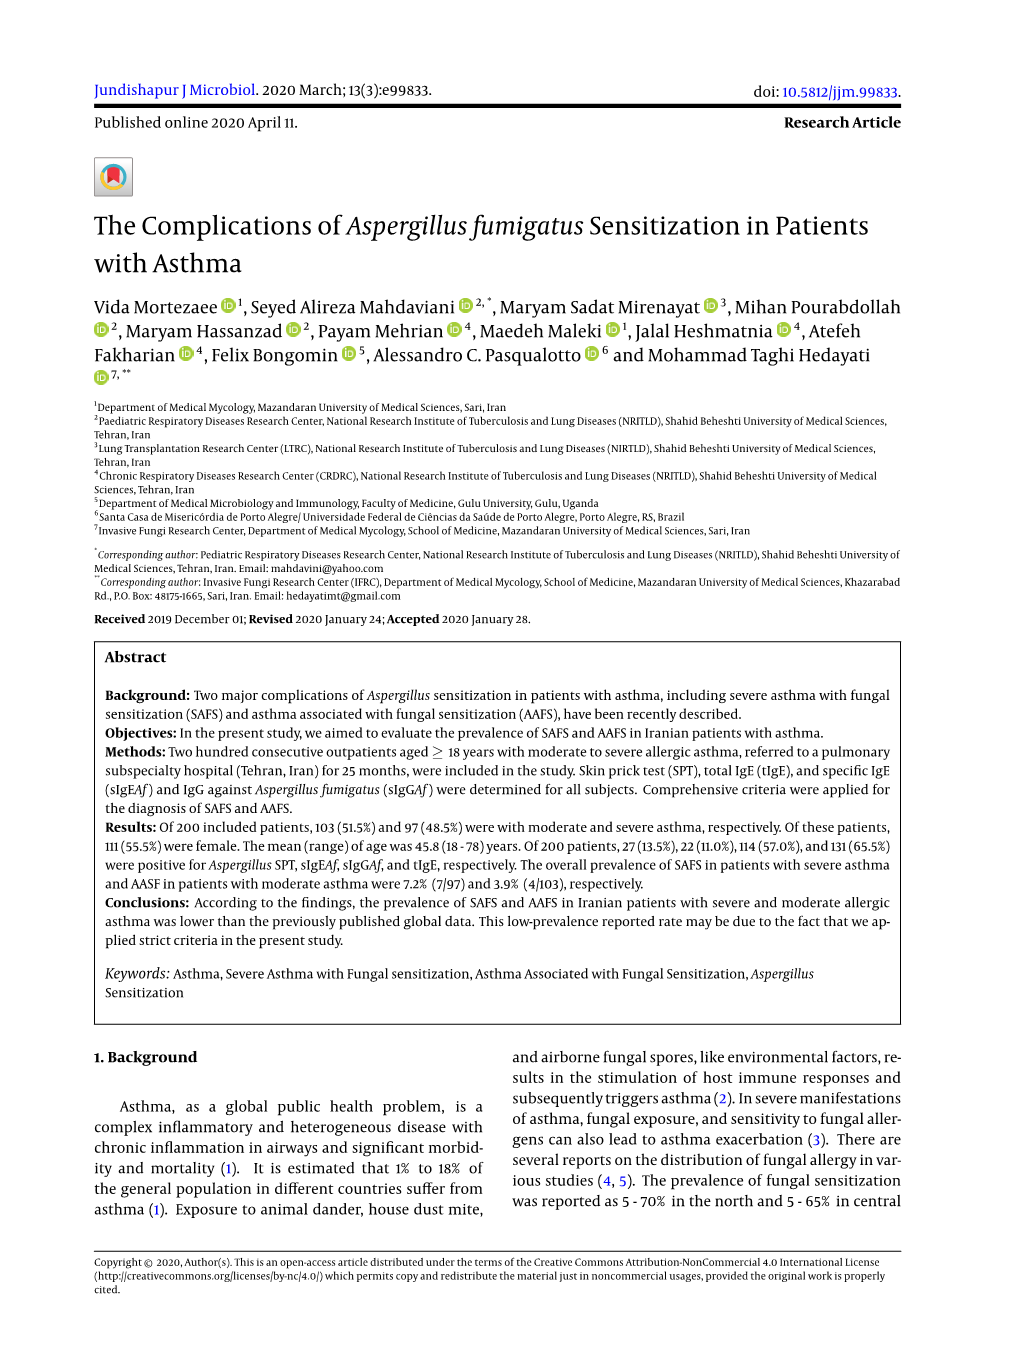 The Complications of Aspergillus Fumigatus Sensitization in Patients with Asthma